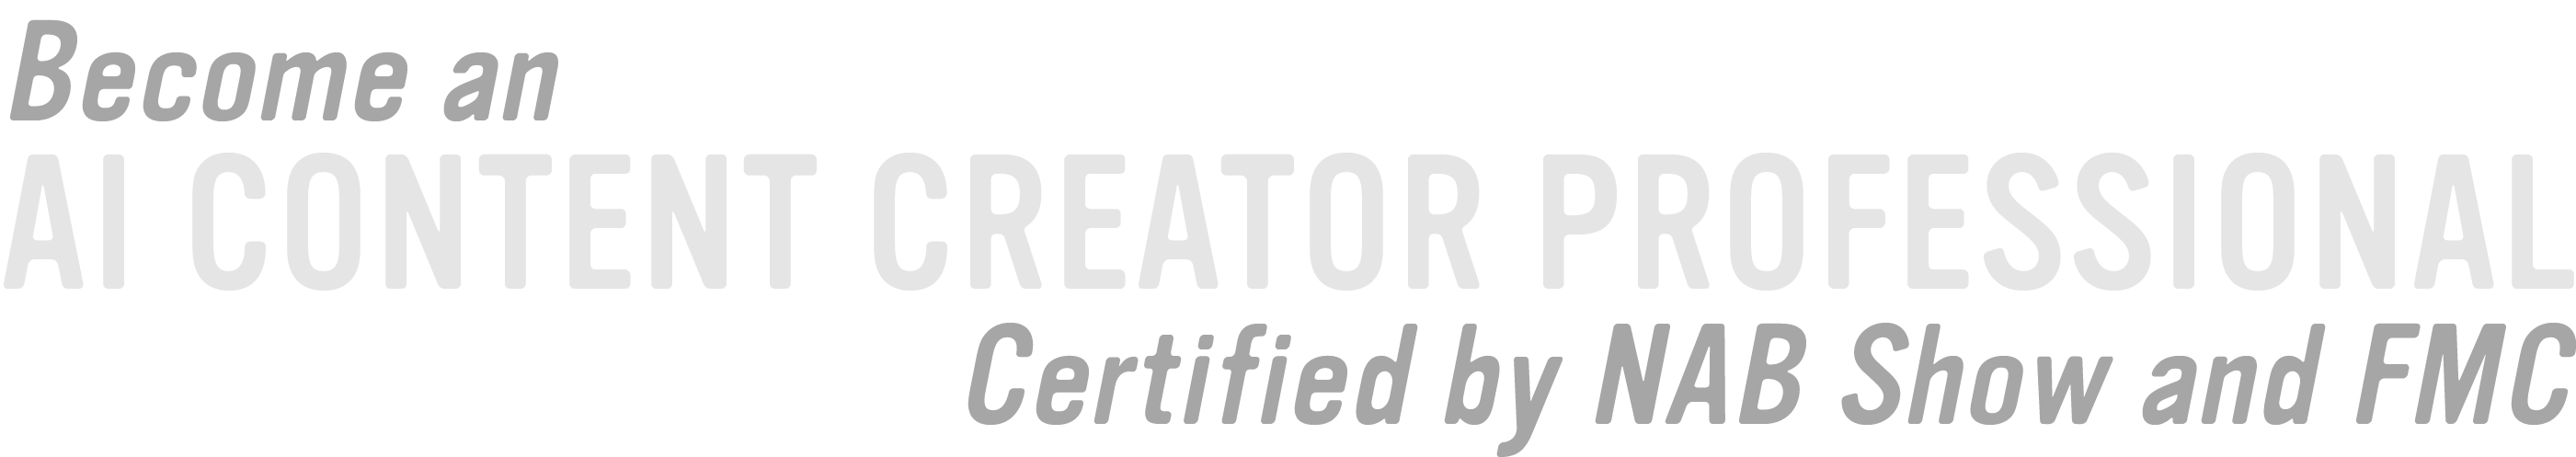 Become an AI Content Creator Professional. Certified by NAB Show and FMC.